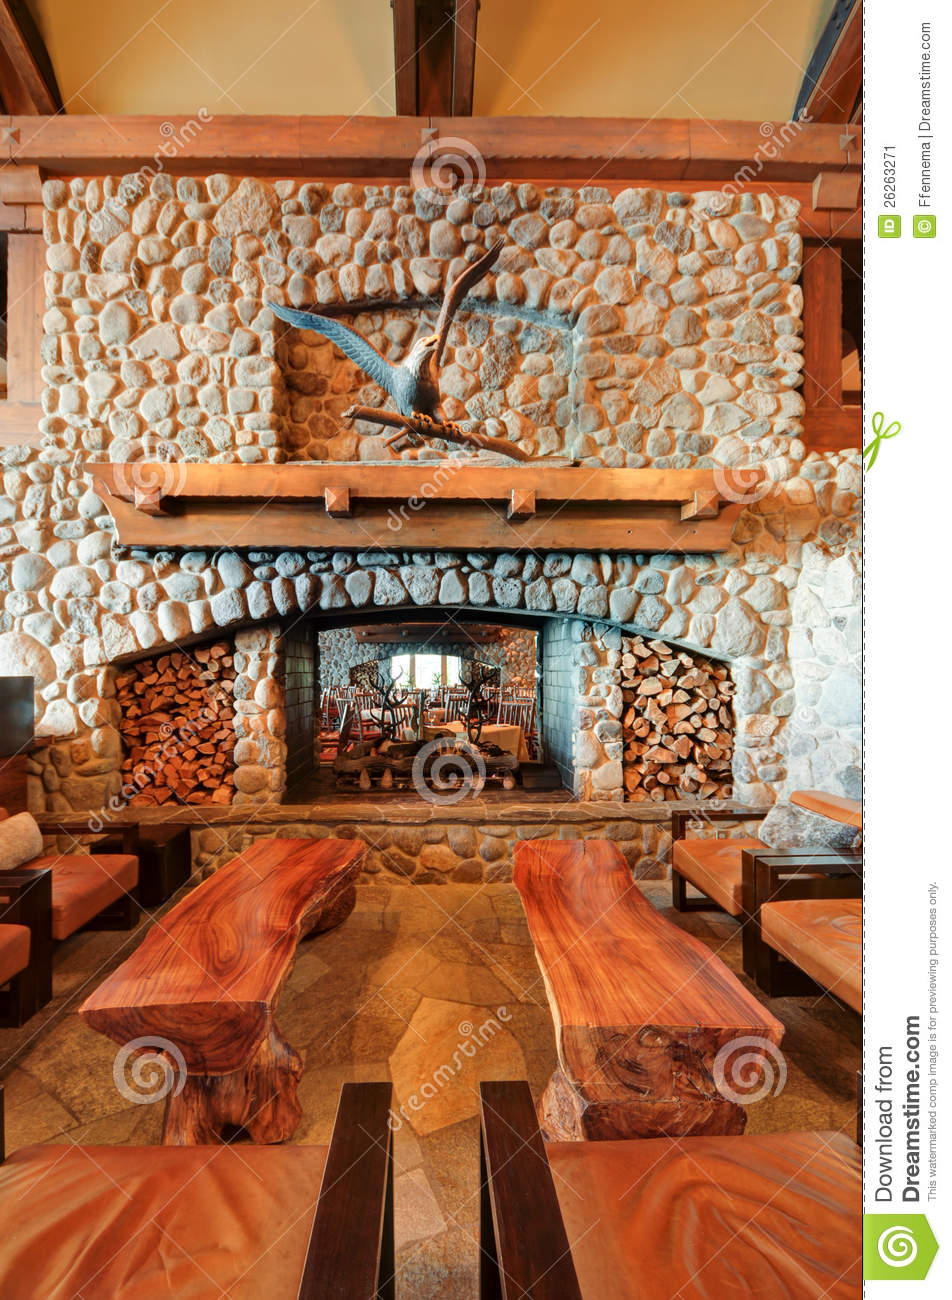 Fireplace Benches Inspirational Restaurant Bar Fireplace with Wooden Benches Stock Image